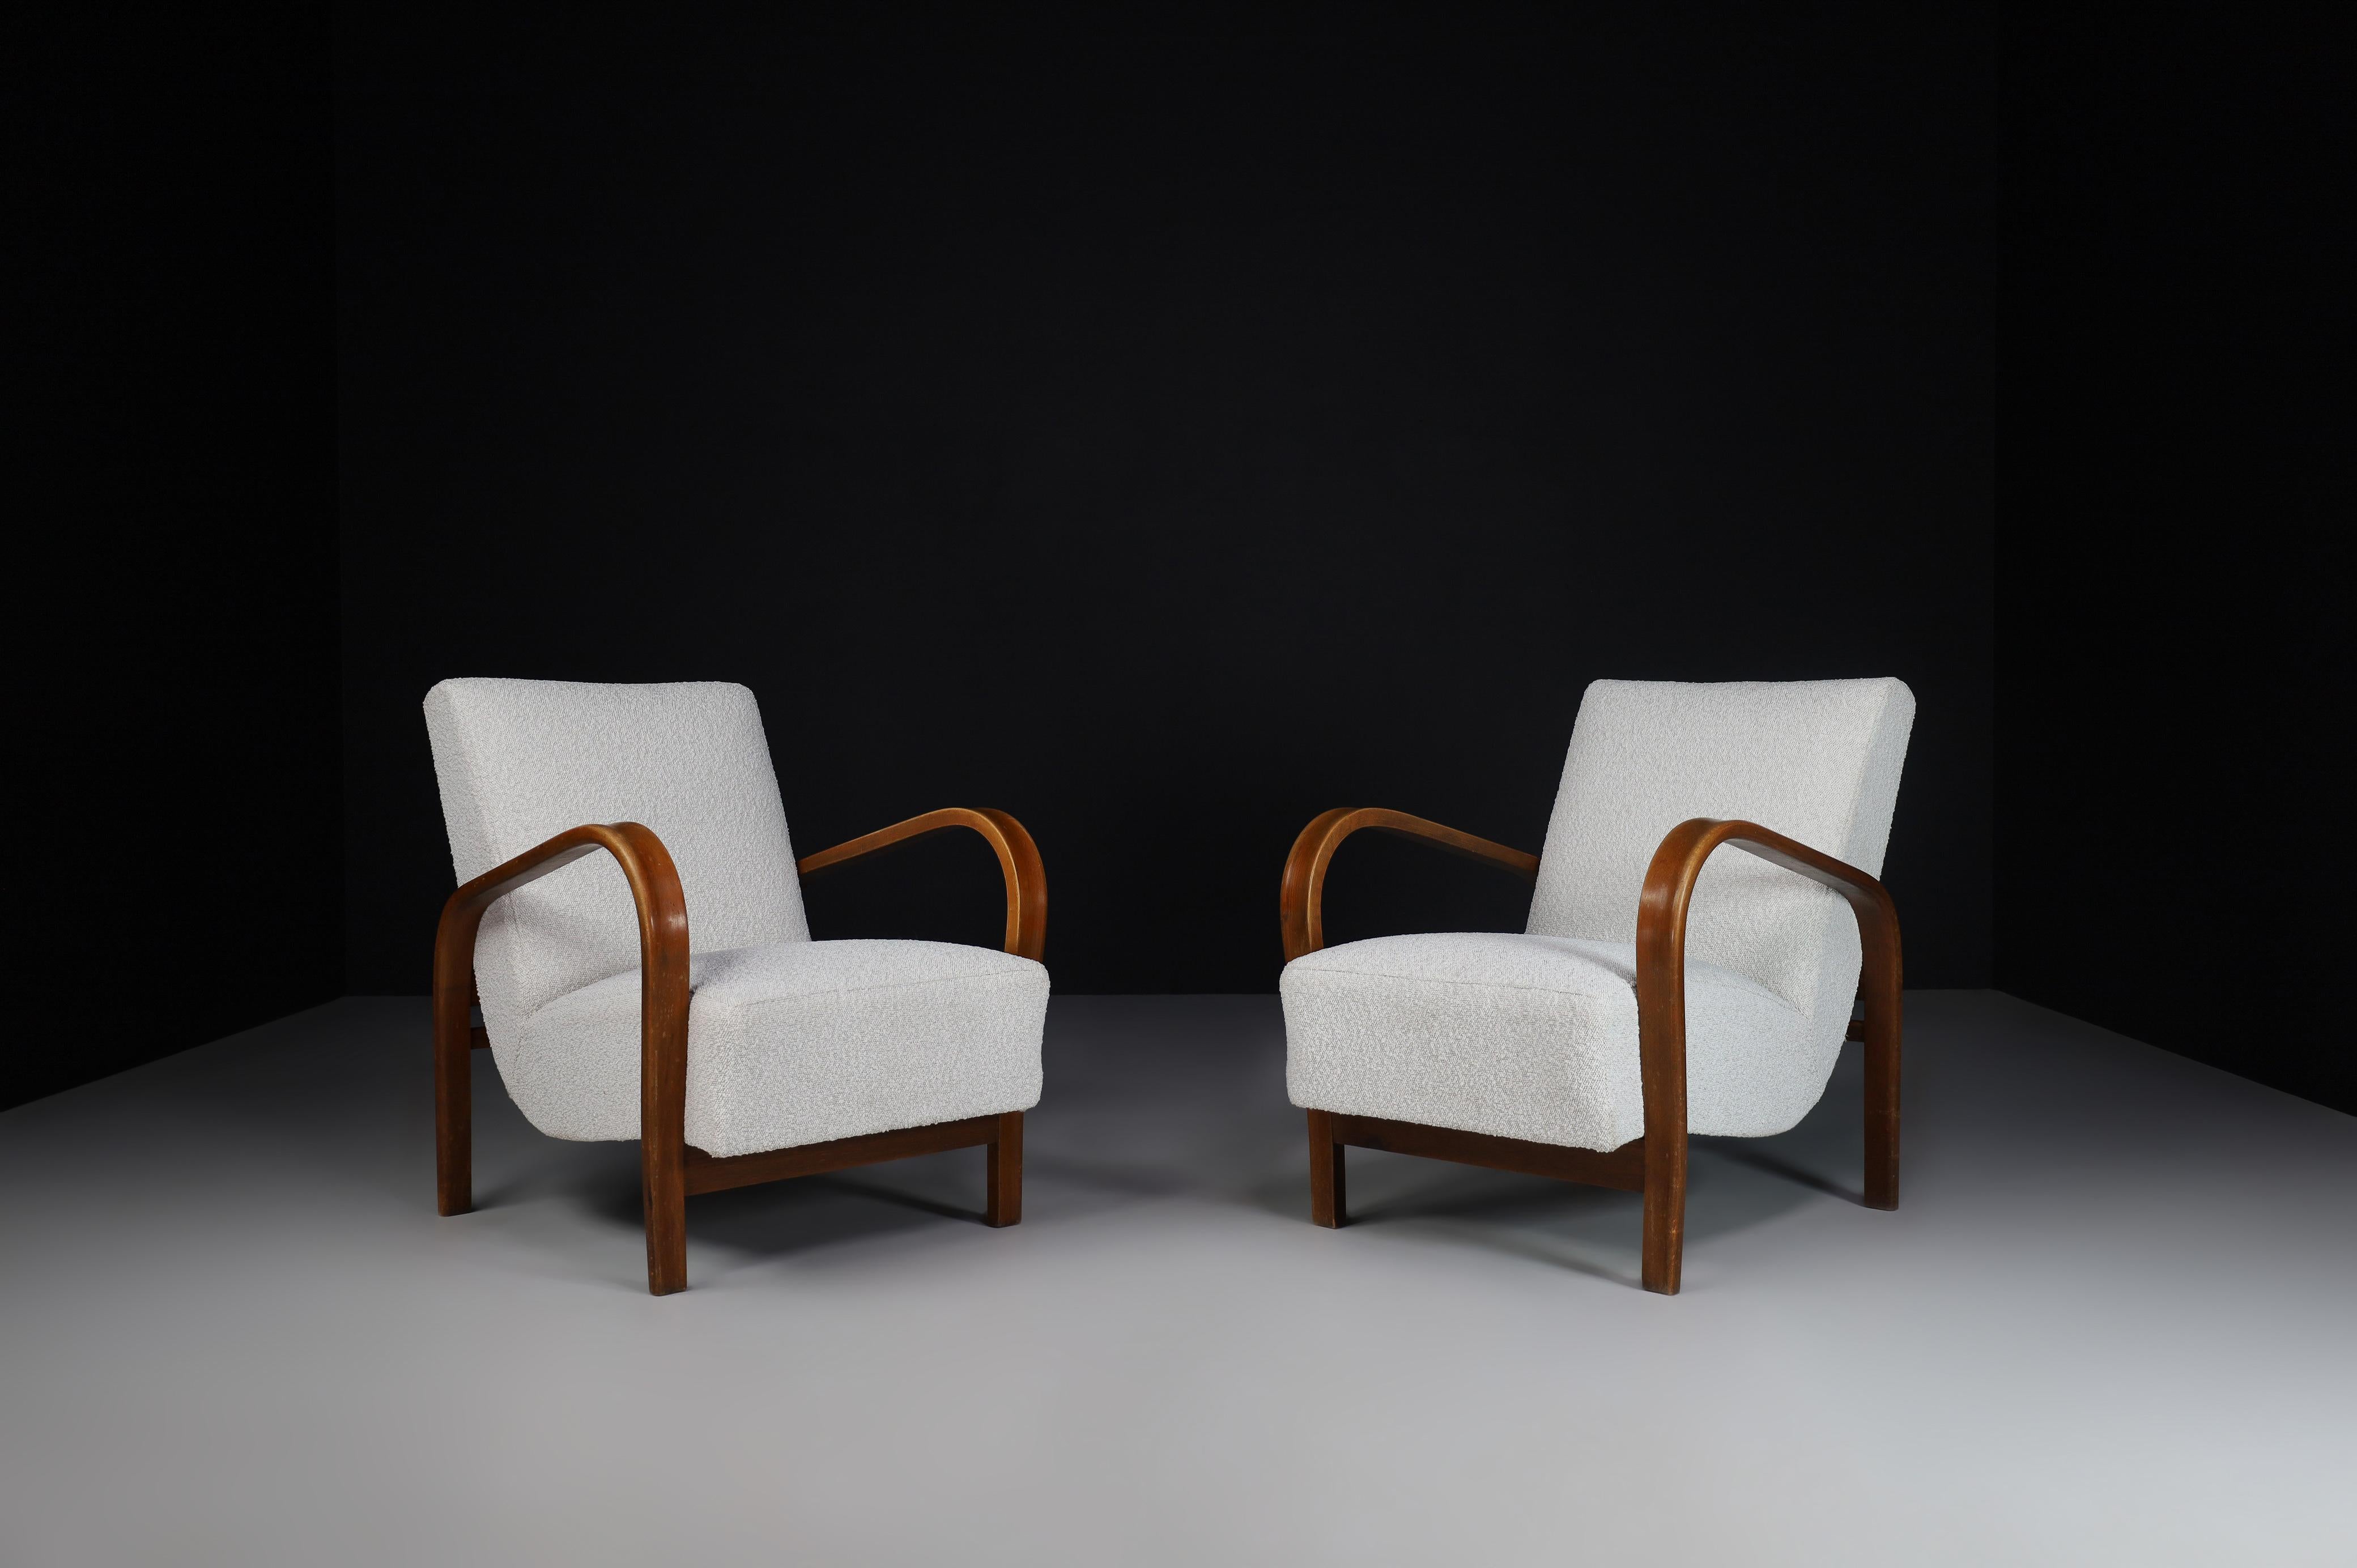 Karel Koželka & Antonín Kropácek Bentwood Armchairs.

These iconic set chairs from Czechia, circa 1940, designed by By Karel Koželka & Antonín Kropácek, are a benchmark for midcentury design in Central Europe. A simple and elegant geometry